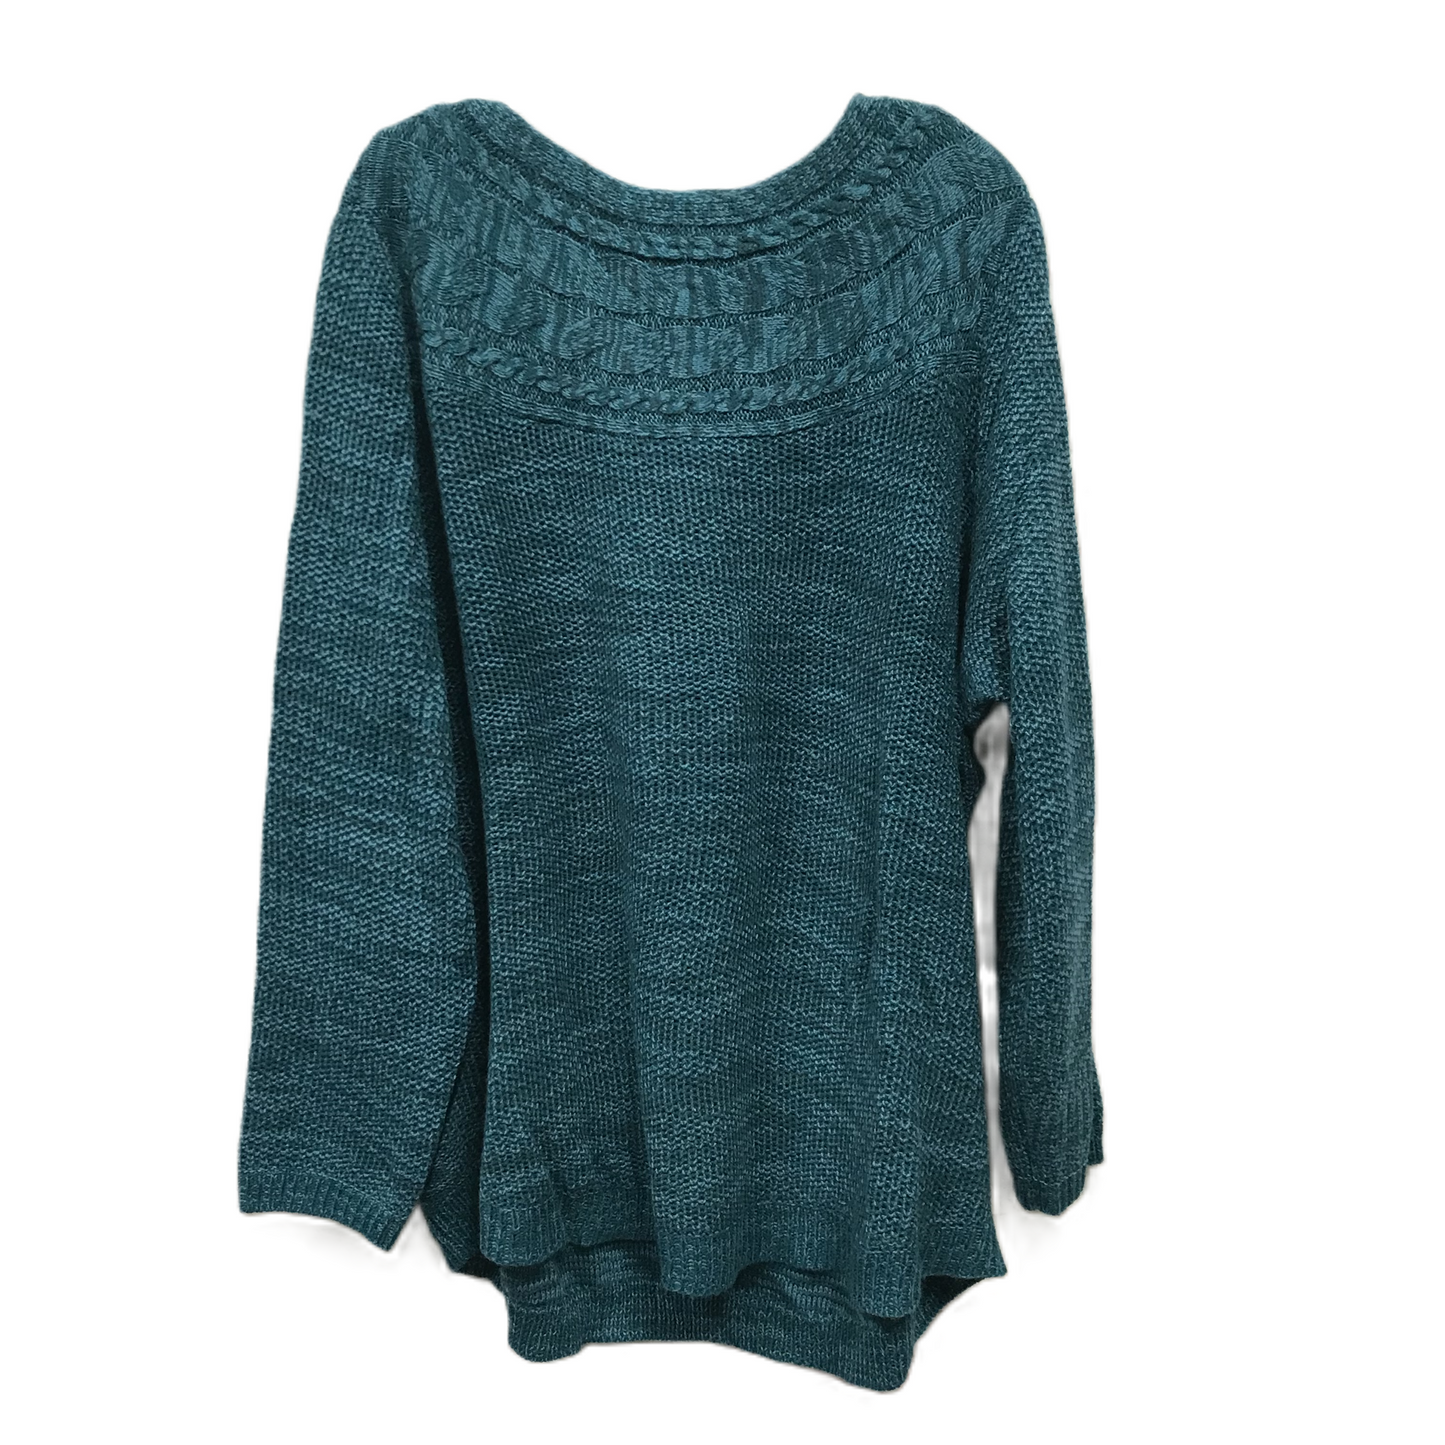 Teal Sweater By Croft And Barrow, Size: 3x